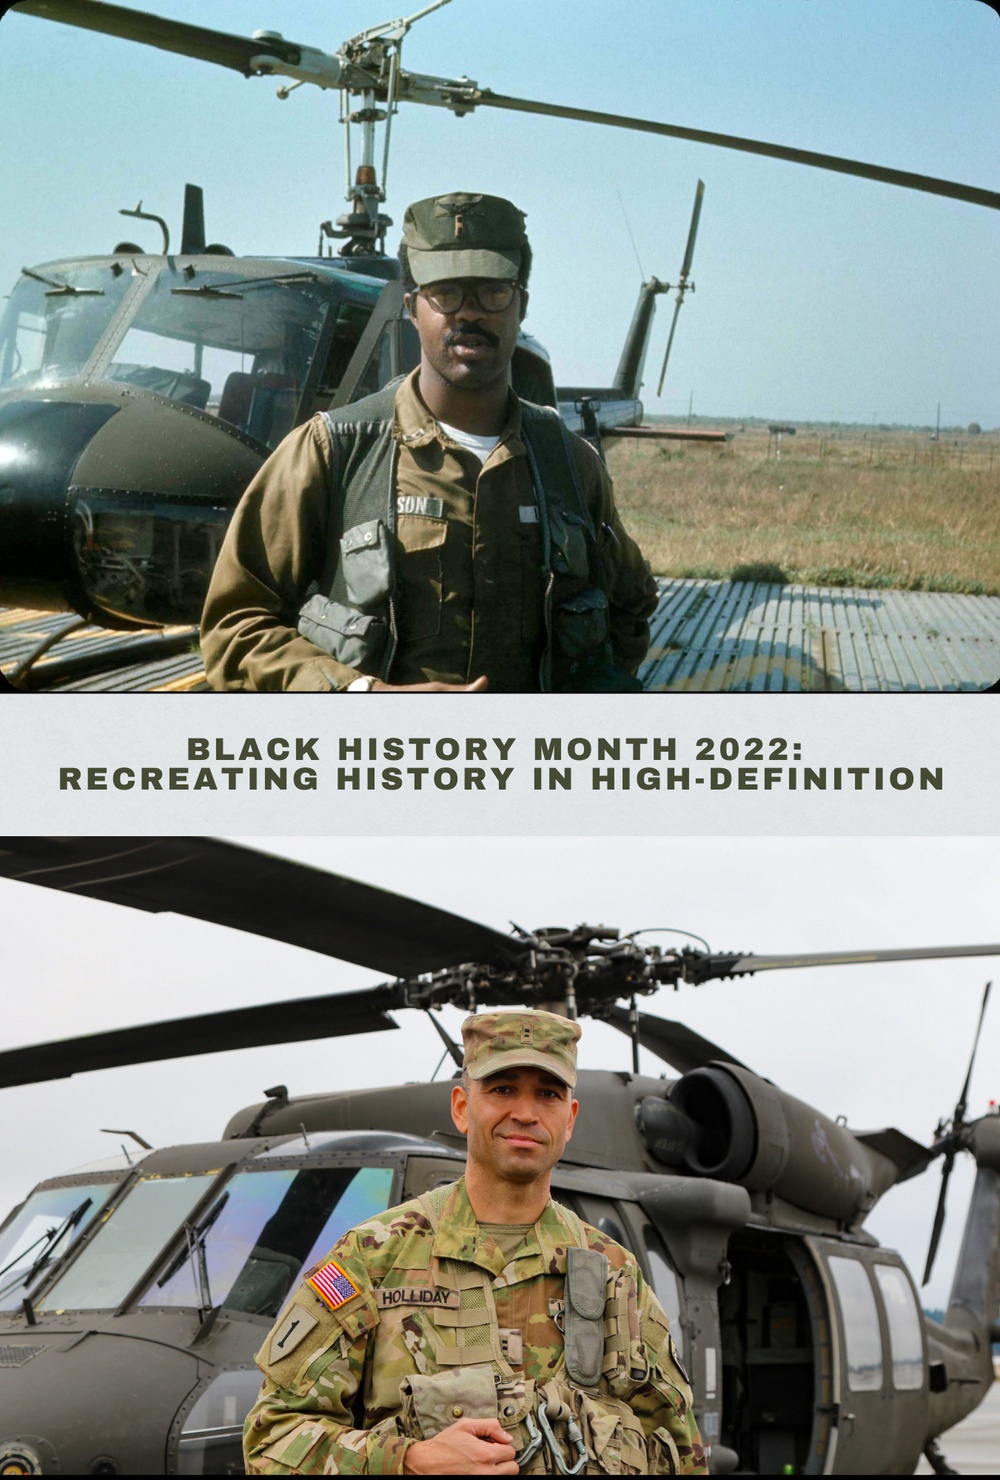 Black History Month 2022: Recreating History in High Definition